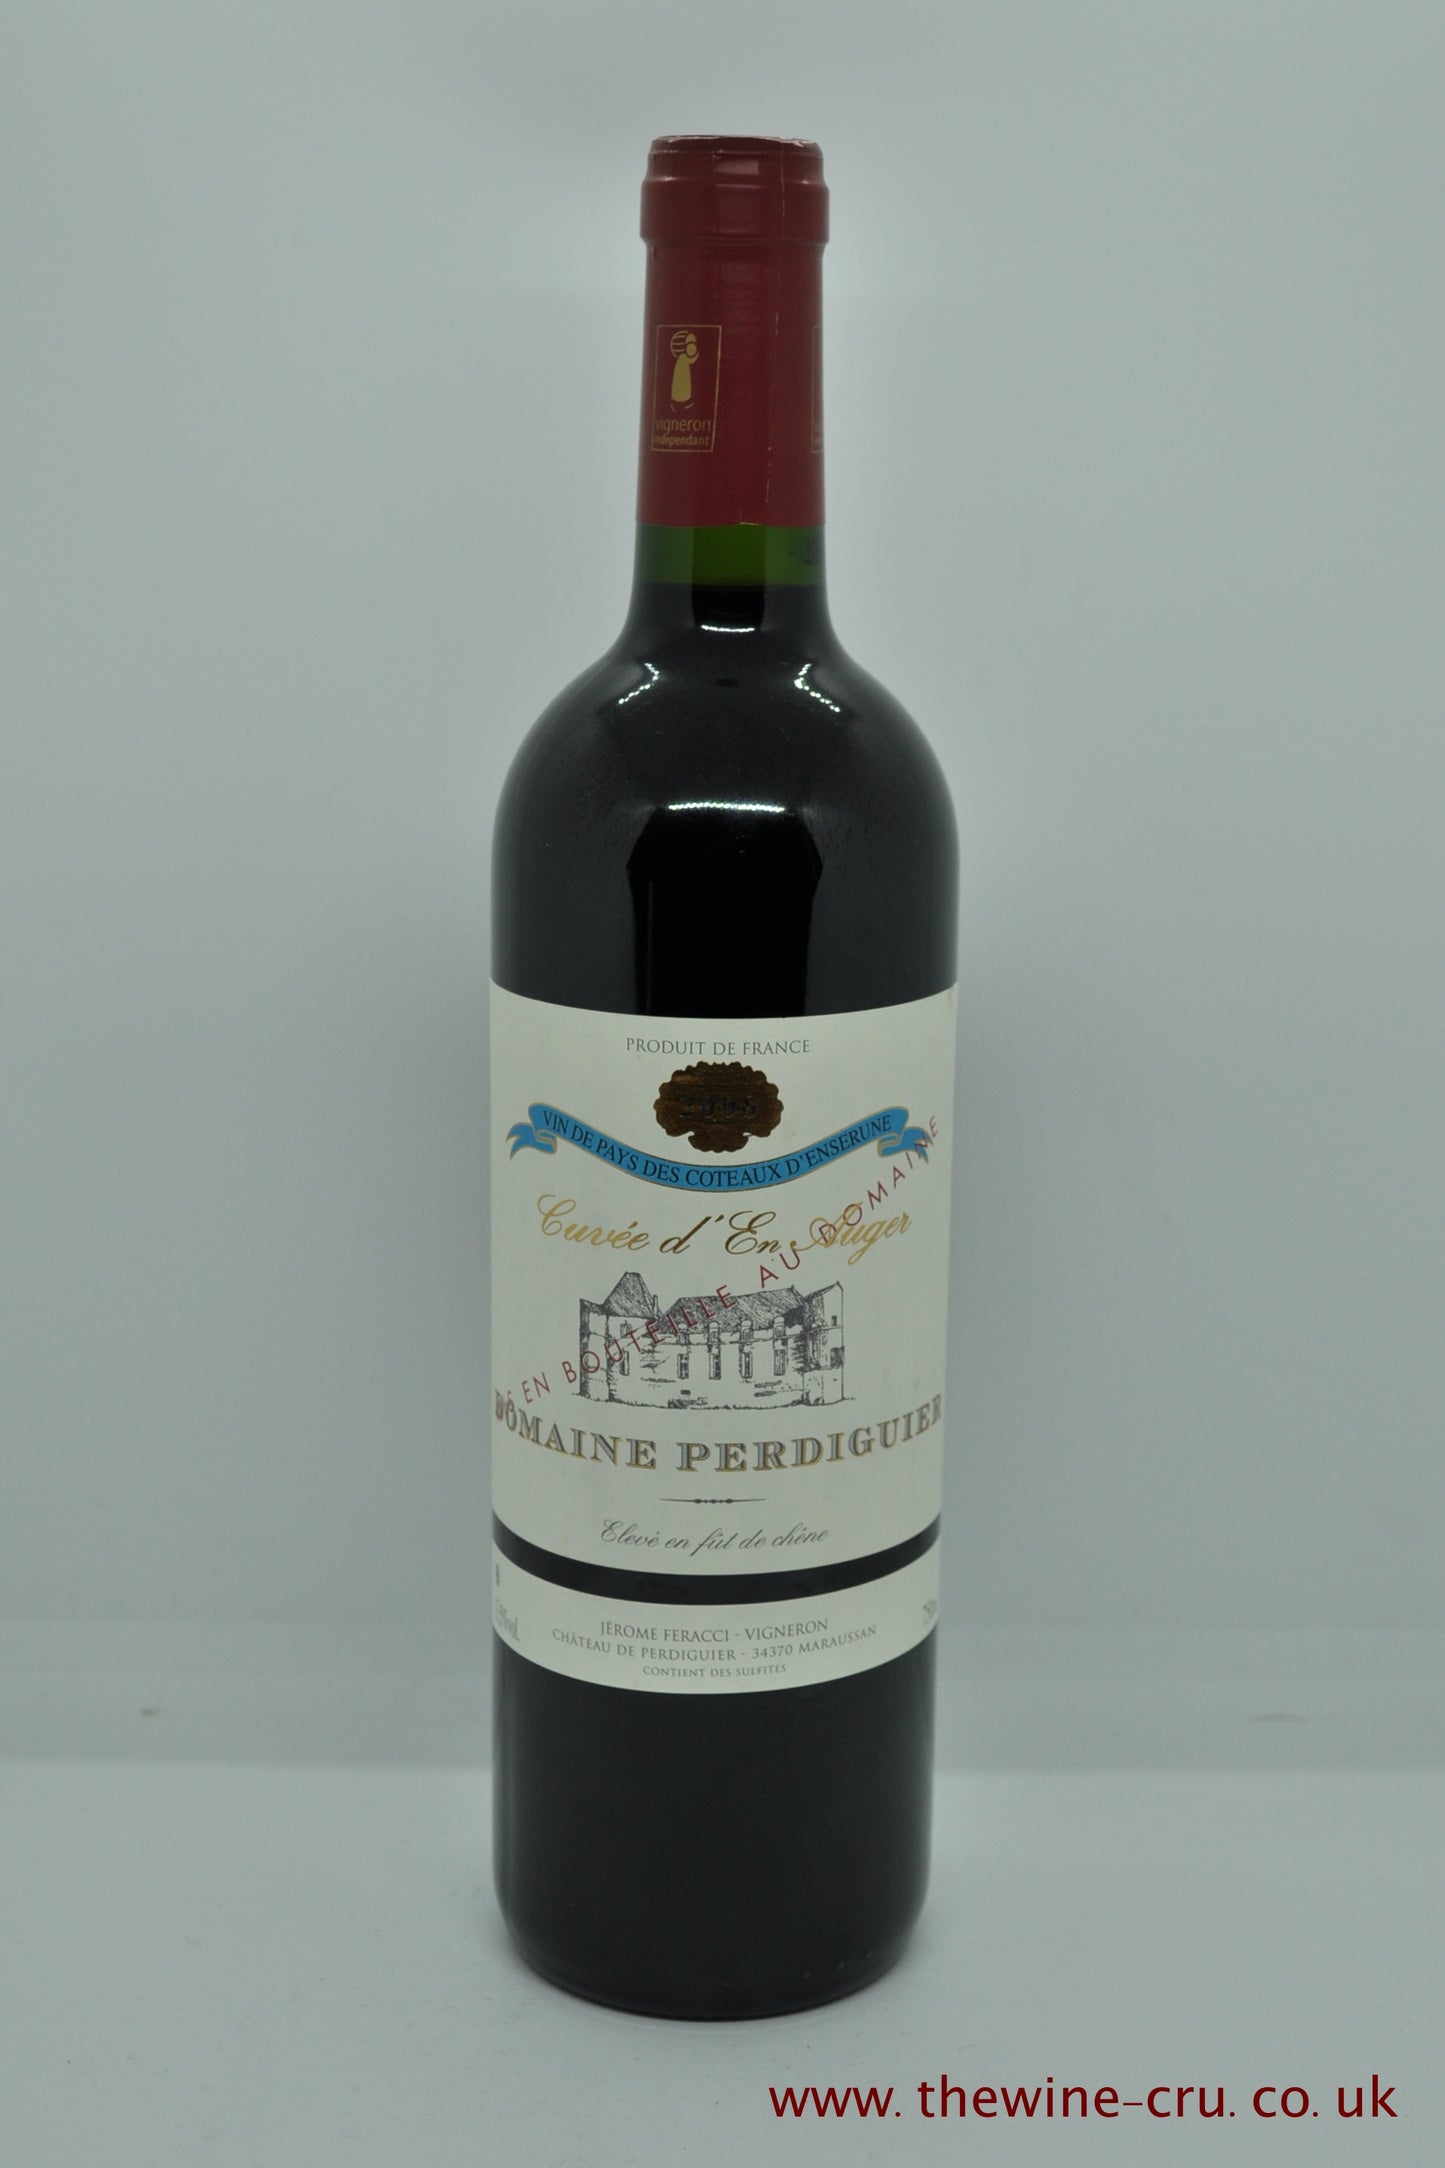 A bottle of 2008 vintage red wine. Domaine Perdiguier Cuvee d'En Auger 2008. France Languedoc-Roussillon. The bottle is in excellent condition. Immediate delivery. Free local delivery. Gift wrapping available.